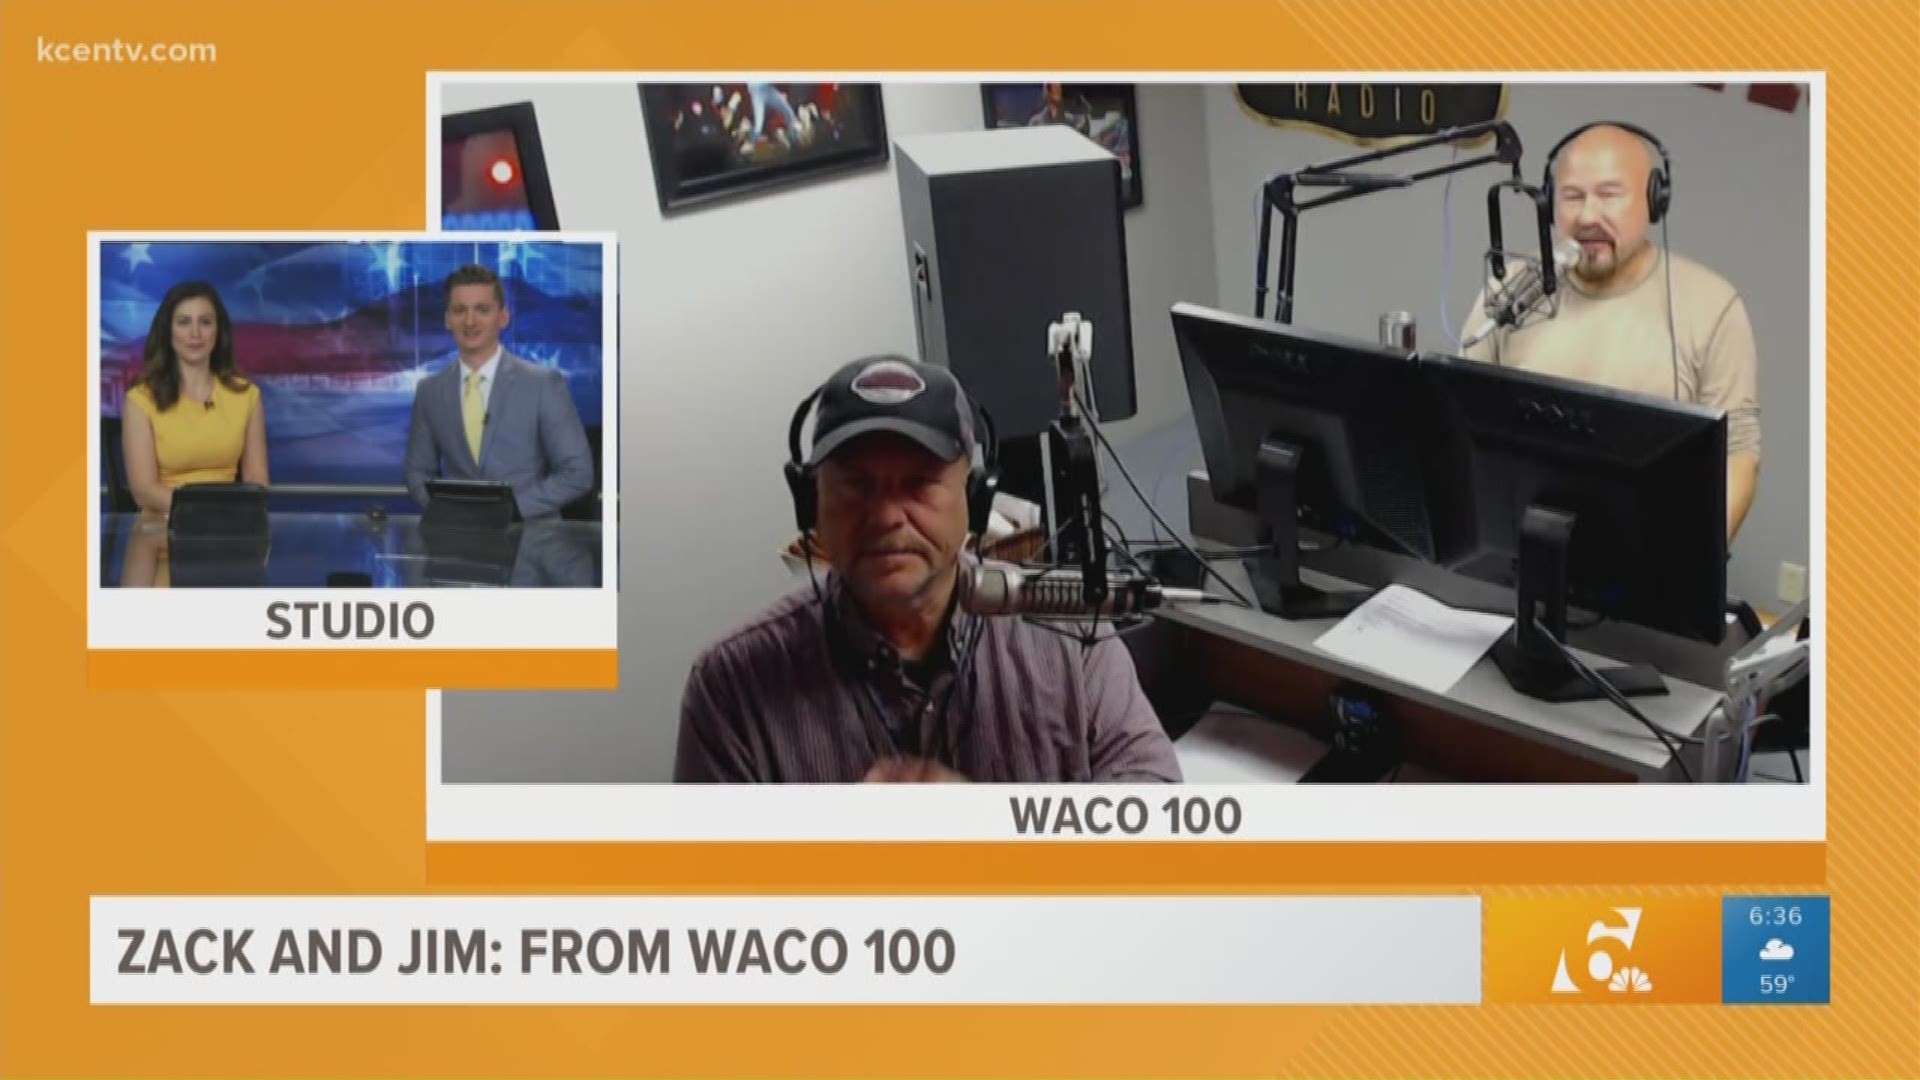 Zack and Jim from Waco 100 join Texas Today to talk about the Baylor Lady Bears National Championship win, Texas Tech University's win in the Final Four, and a look ahead at weekend events.